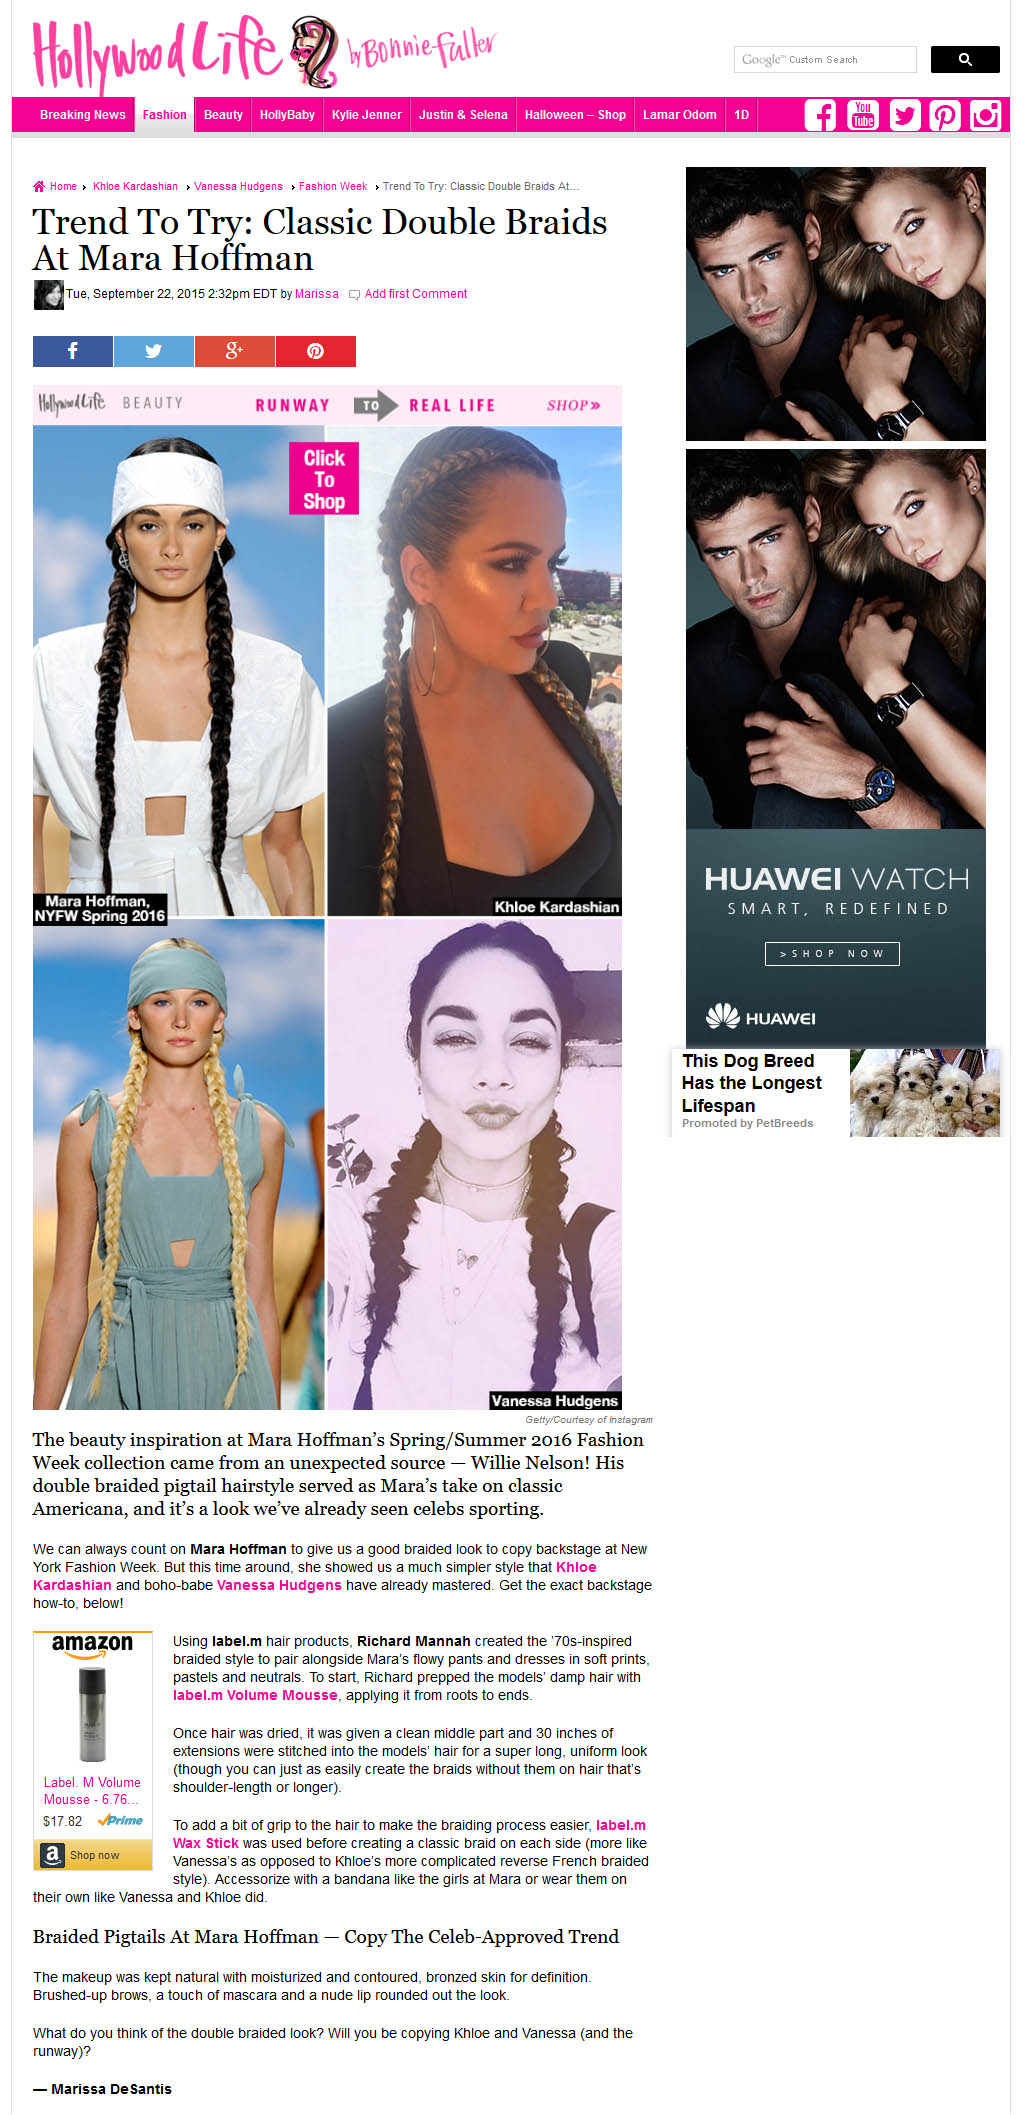 Richard Mannah’s Willie Nelson-inspired braids a hit with Hollywood Life.”